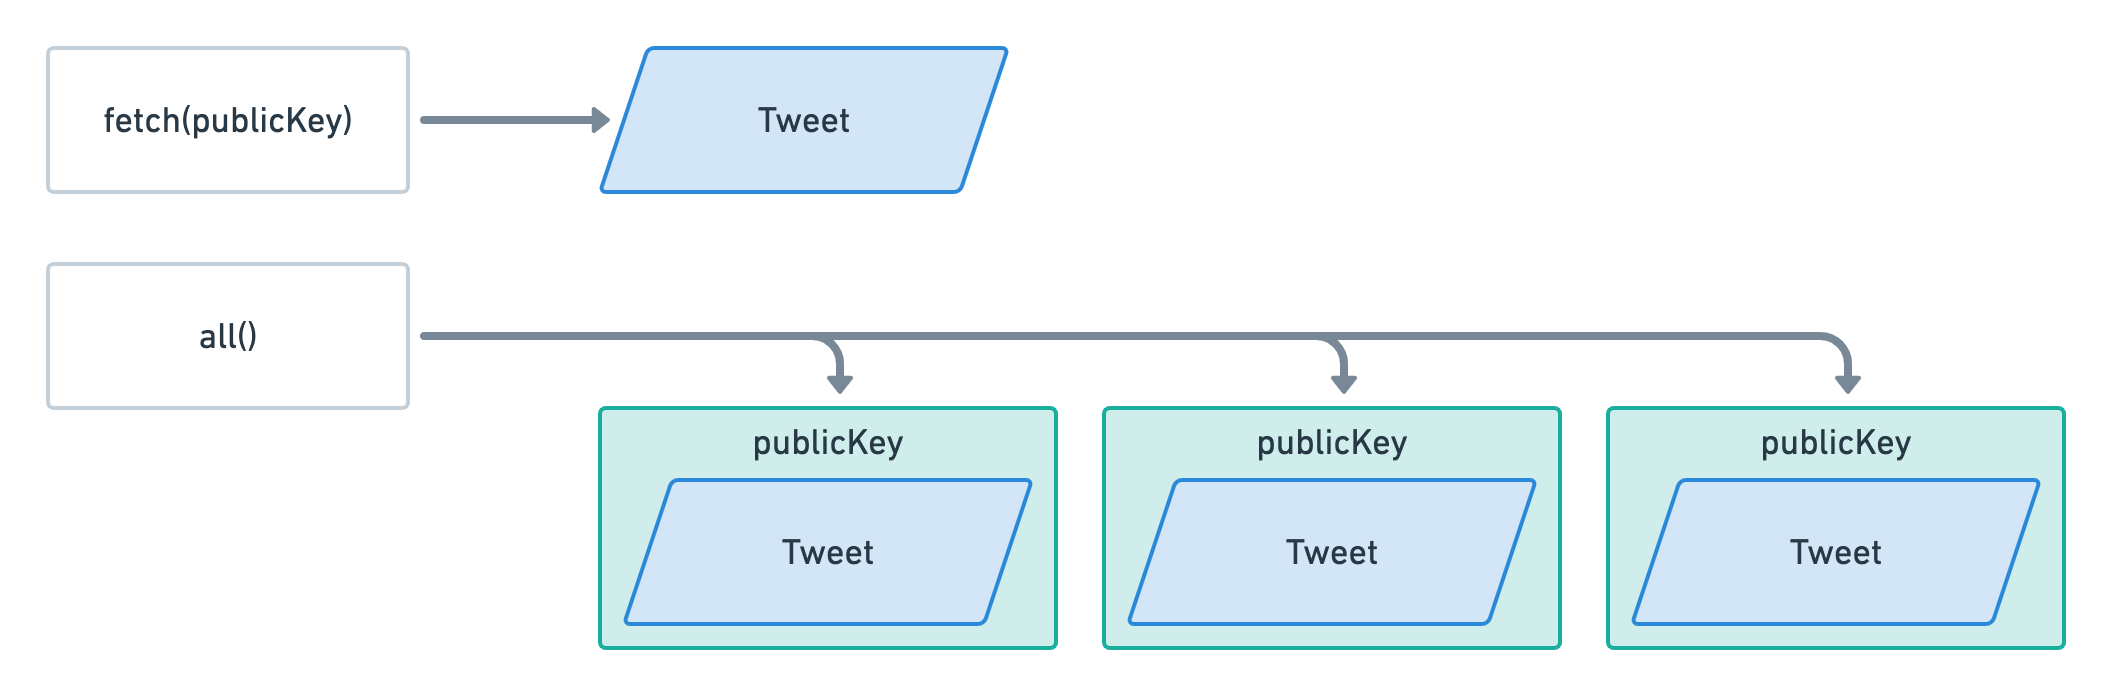 Little diagram showing what "fetch(publicKey)" and "all()" return. The former returns a "Tweet" account directly whereas the latter returns 3 objects containing both a "Tweet" account and a public key.